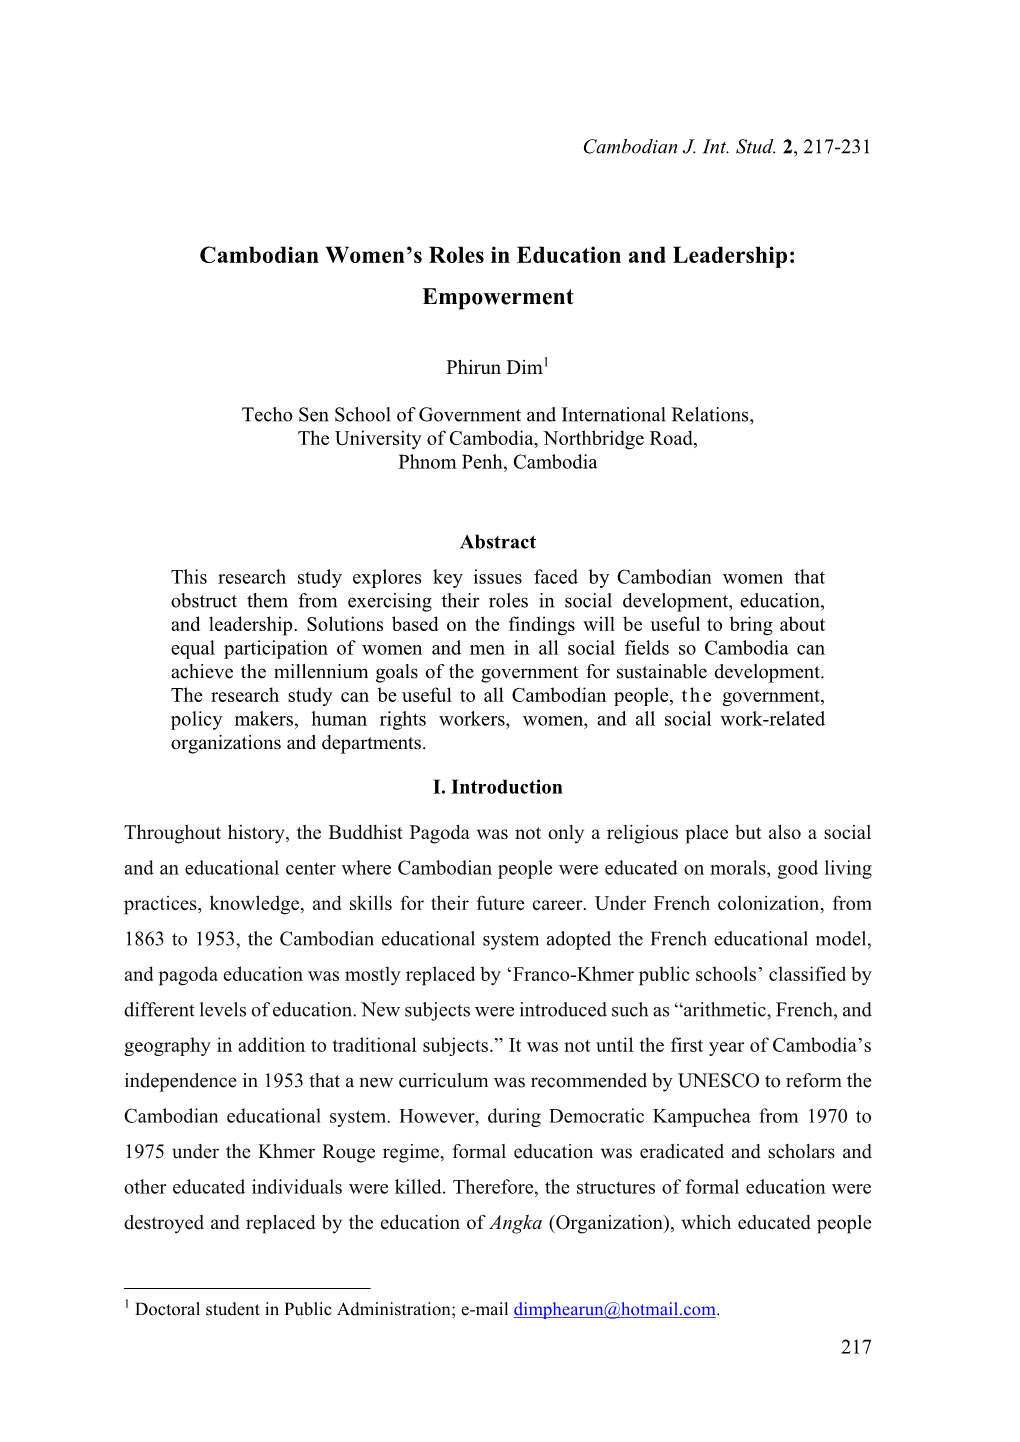 Cambodian Women's Roles in Education and Leadership